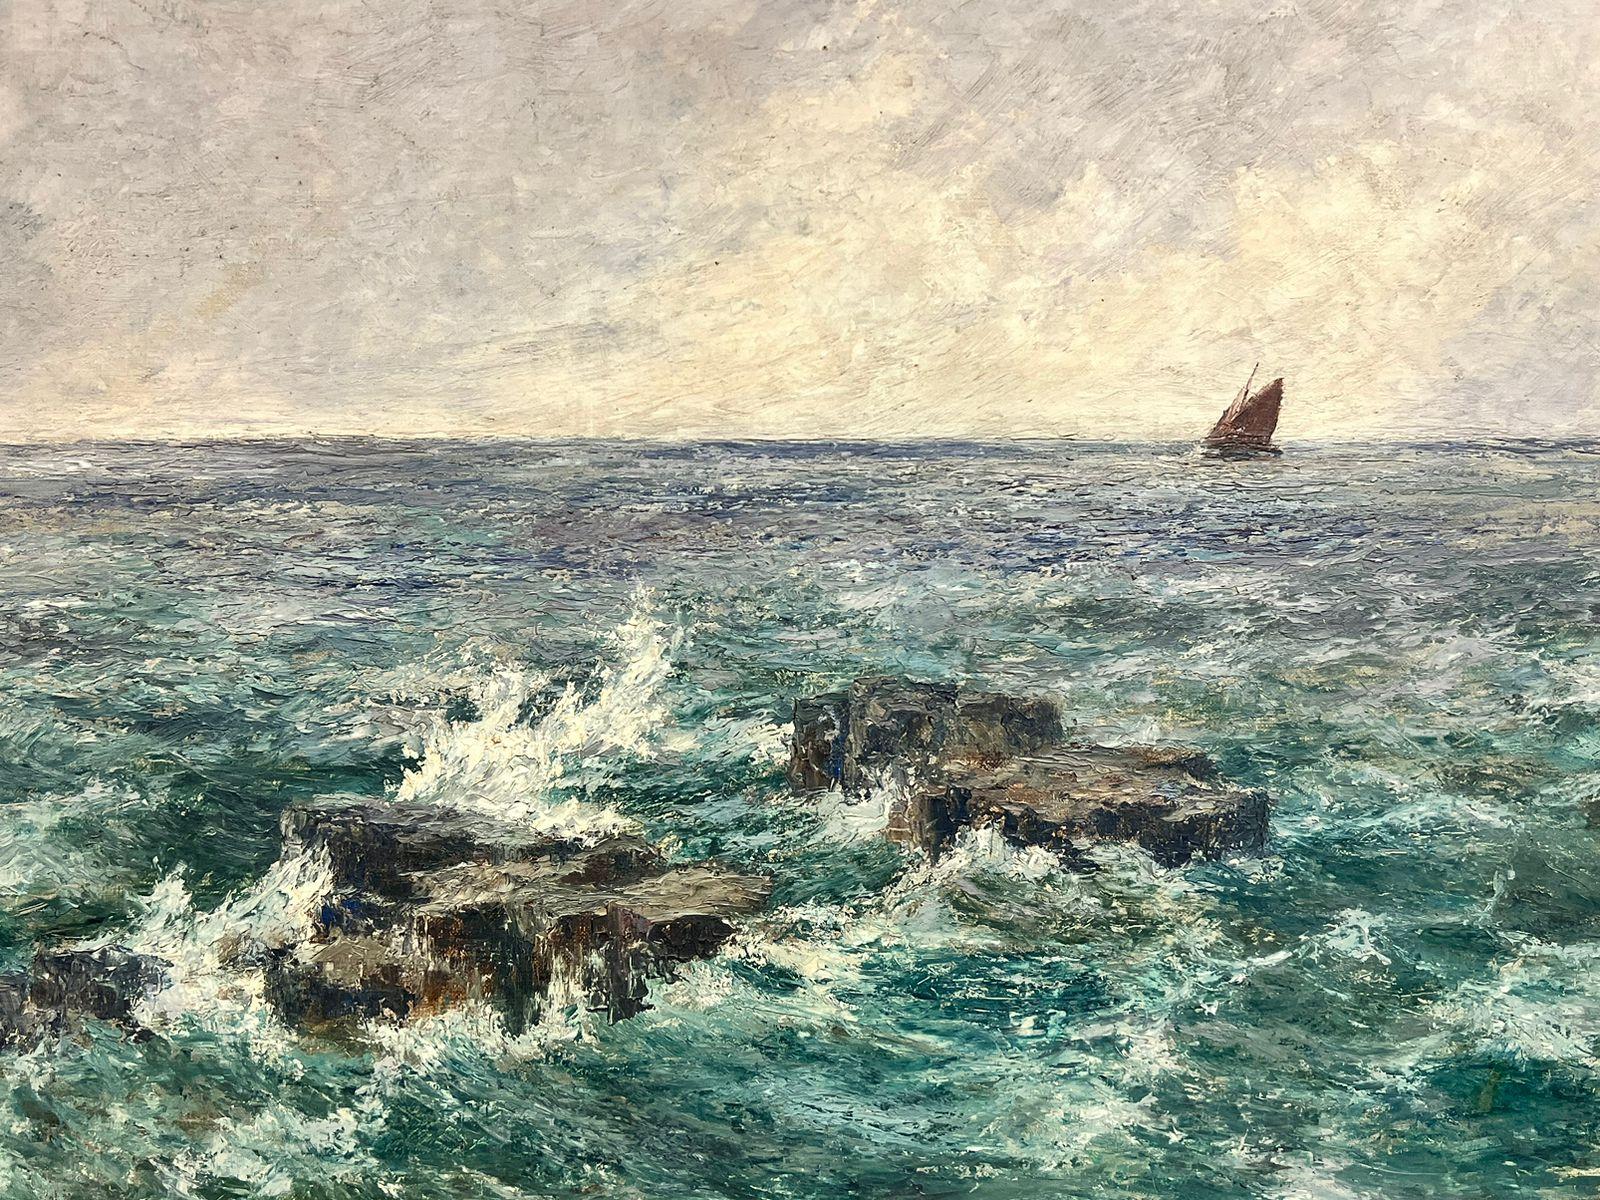 Ship at Sea
RICHARD HESKETH (1867-1919) 
oil on canvas, framed
signed and dated 1902
framed: 24 x 32 inches
canvas: 20 x 28 inches

provenance:
The painting is in very good and presentable condition.
